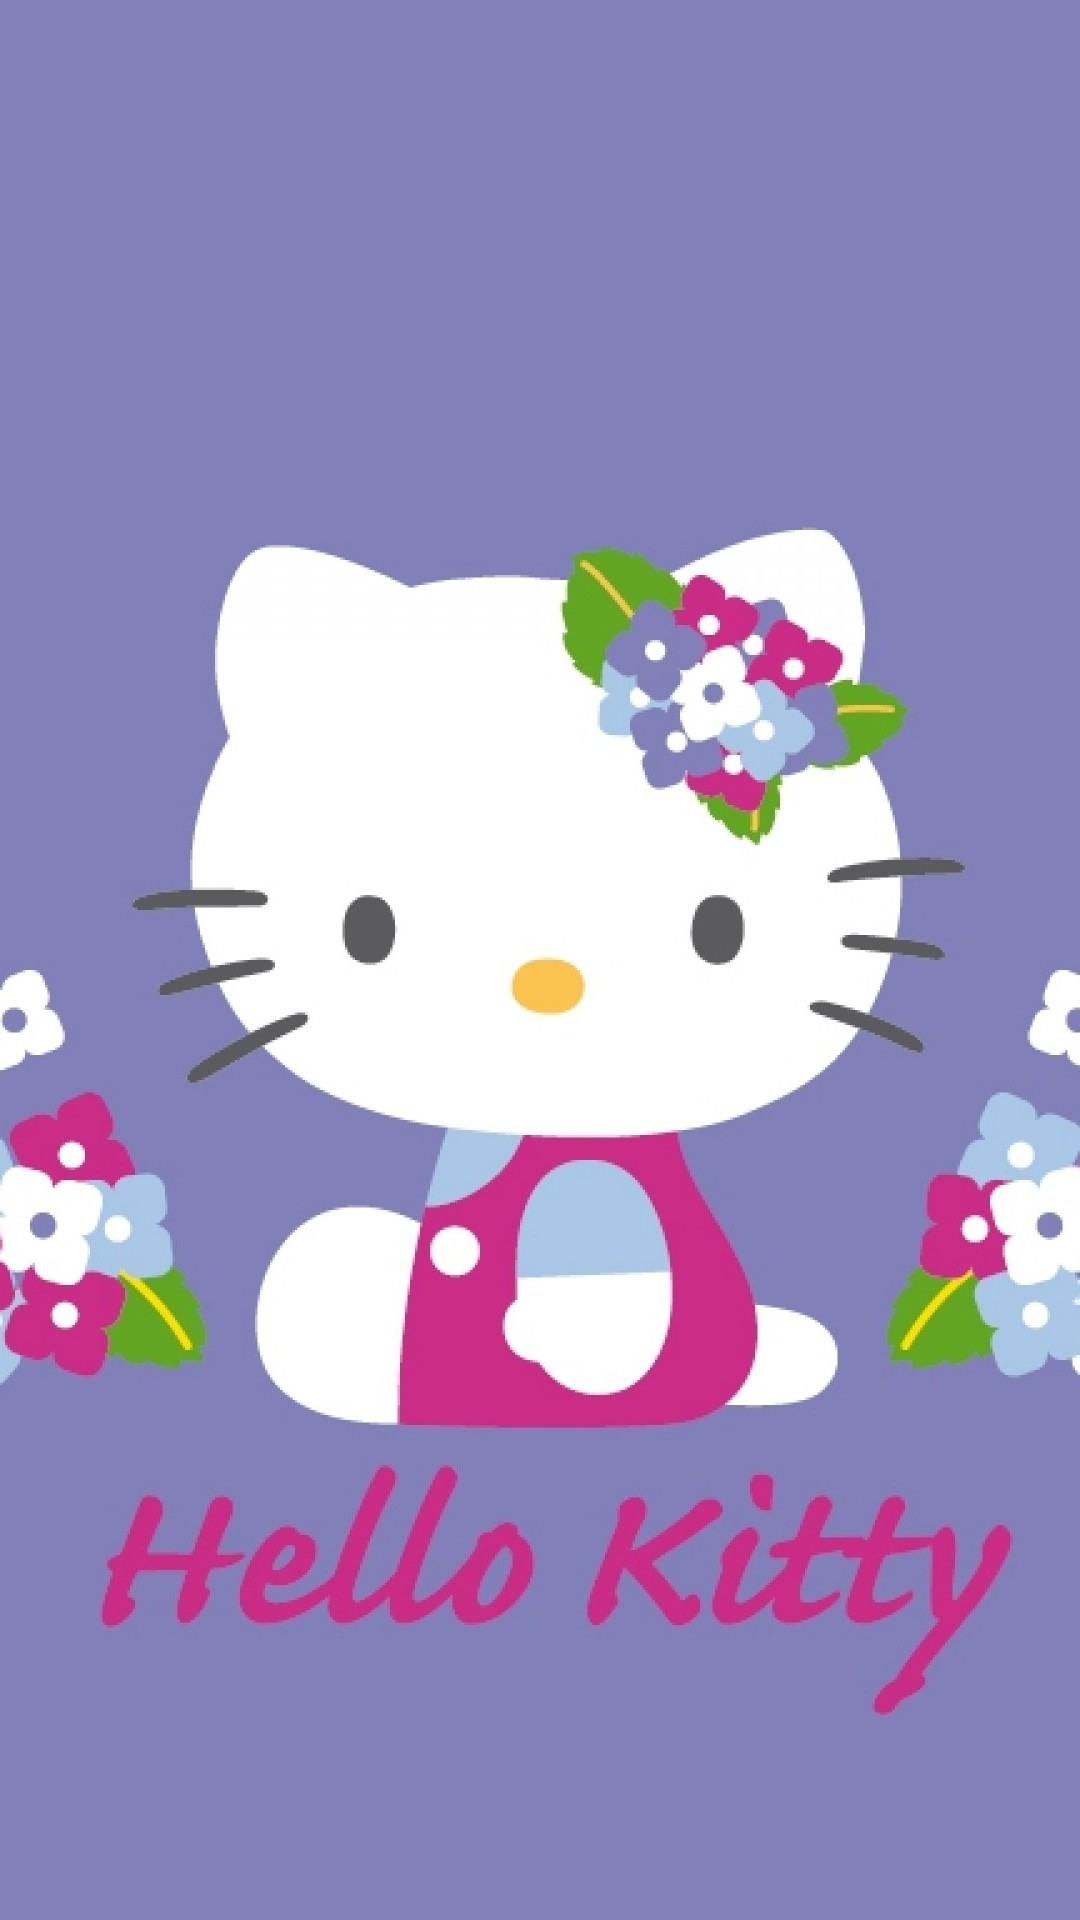 Hello Kitty iPhone 6 Wallpaper with resolution 1080X1920 pixel. You can use this wallpaper as background for your desktop Computer Screensavers, Android or iPhone smartphones